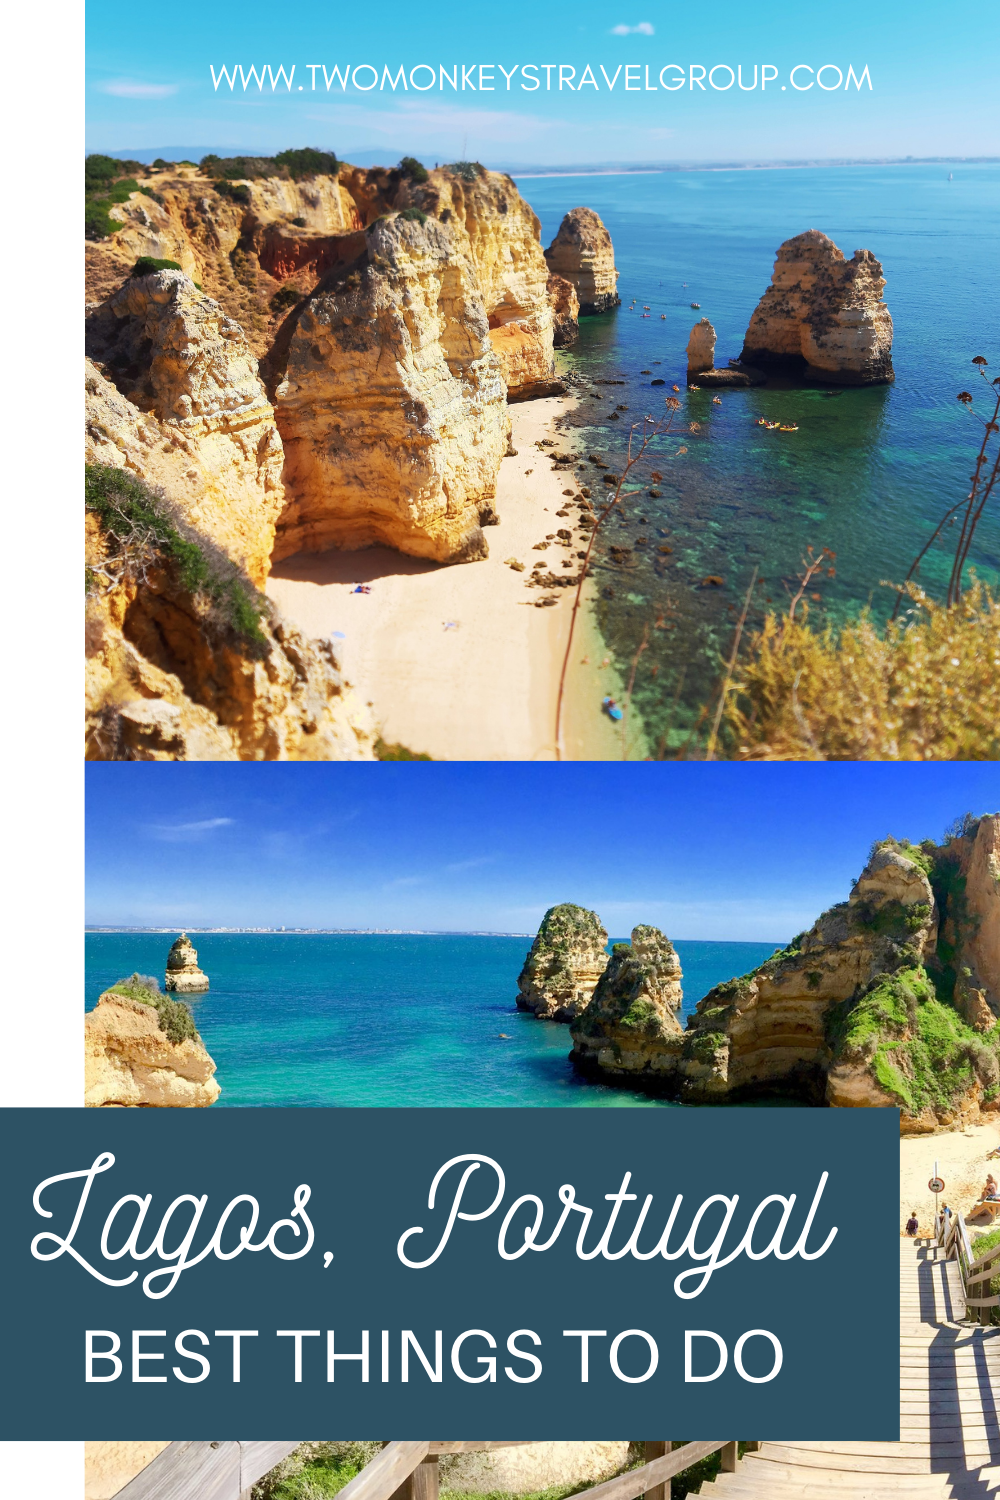 6 Best Things to do in Lagos, Portugal and Where to Stay